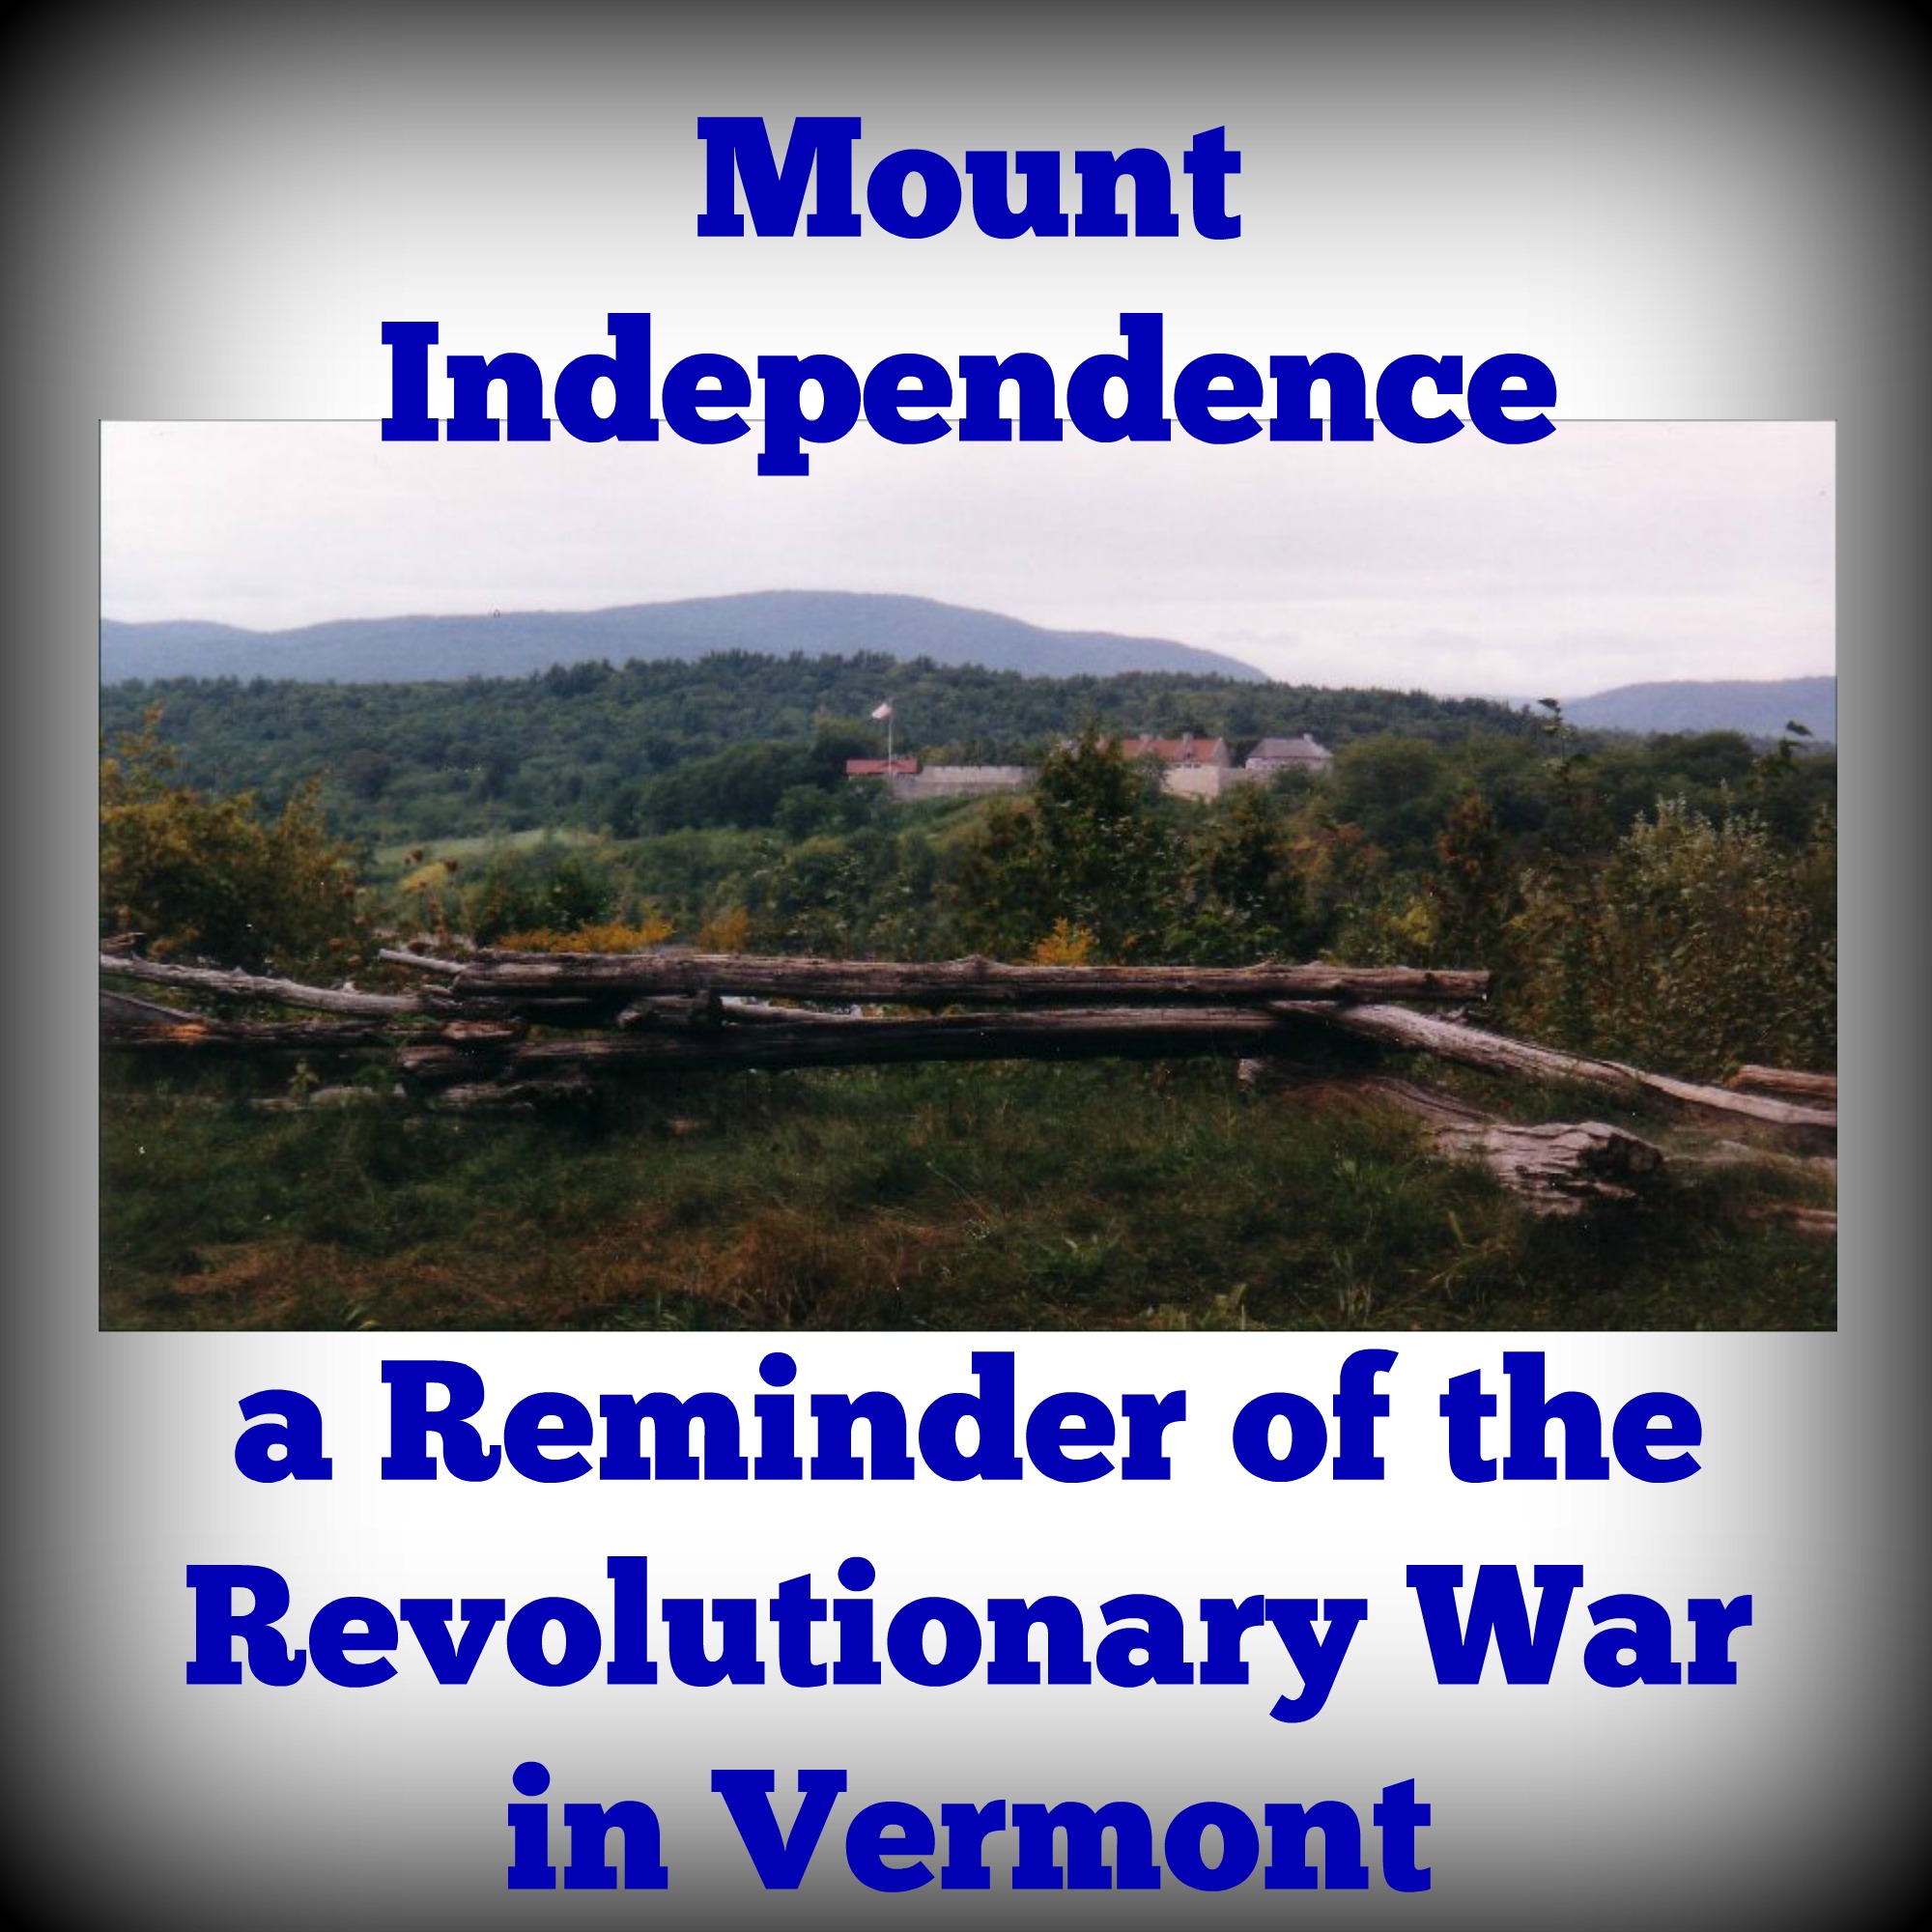 Mount Independence, a Reminder of the Revolutionary War in Vermont